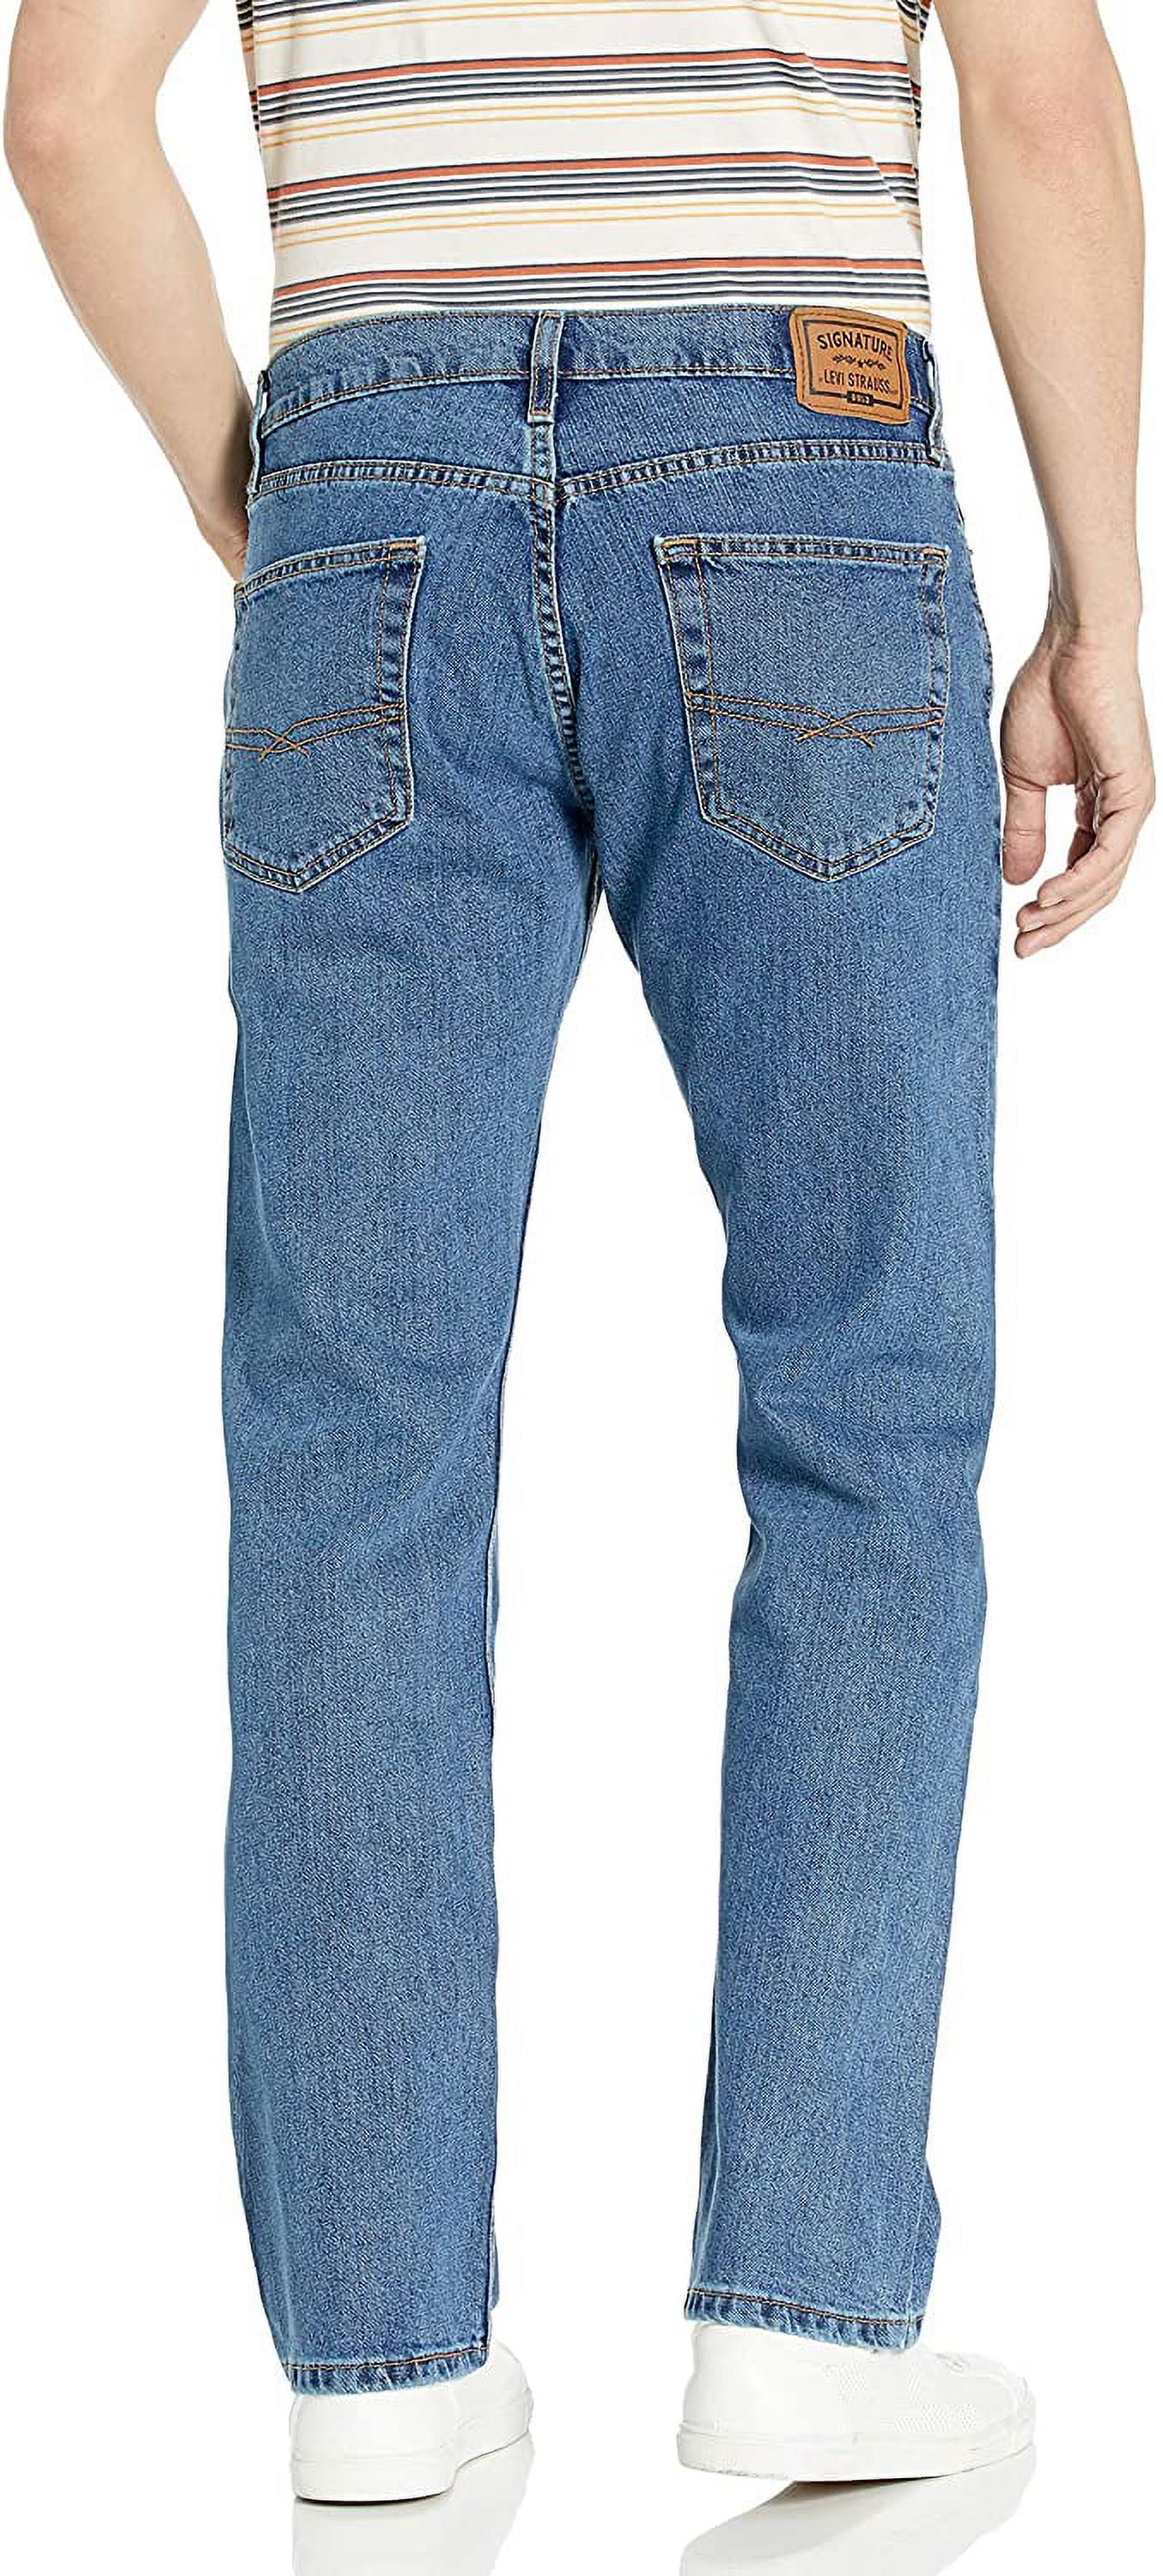 Signature by Levi Strauss  Co. Gold Label Mens Regular Fit Jeans - image 2 of 3